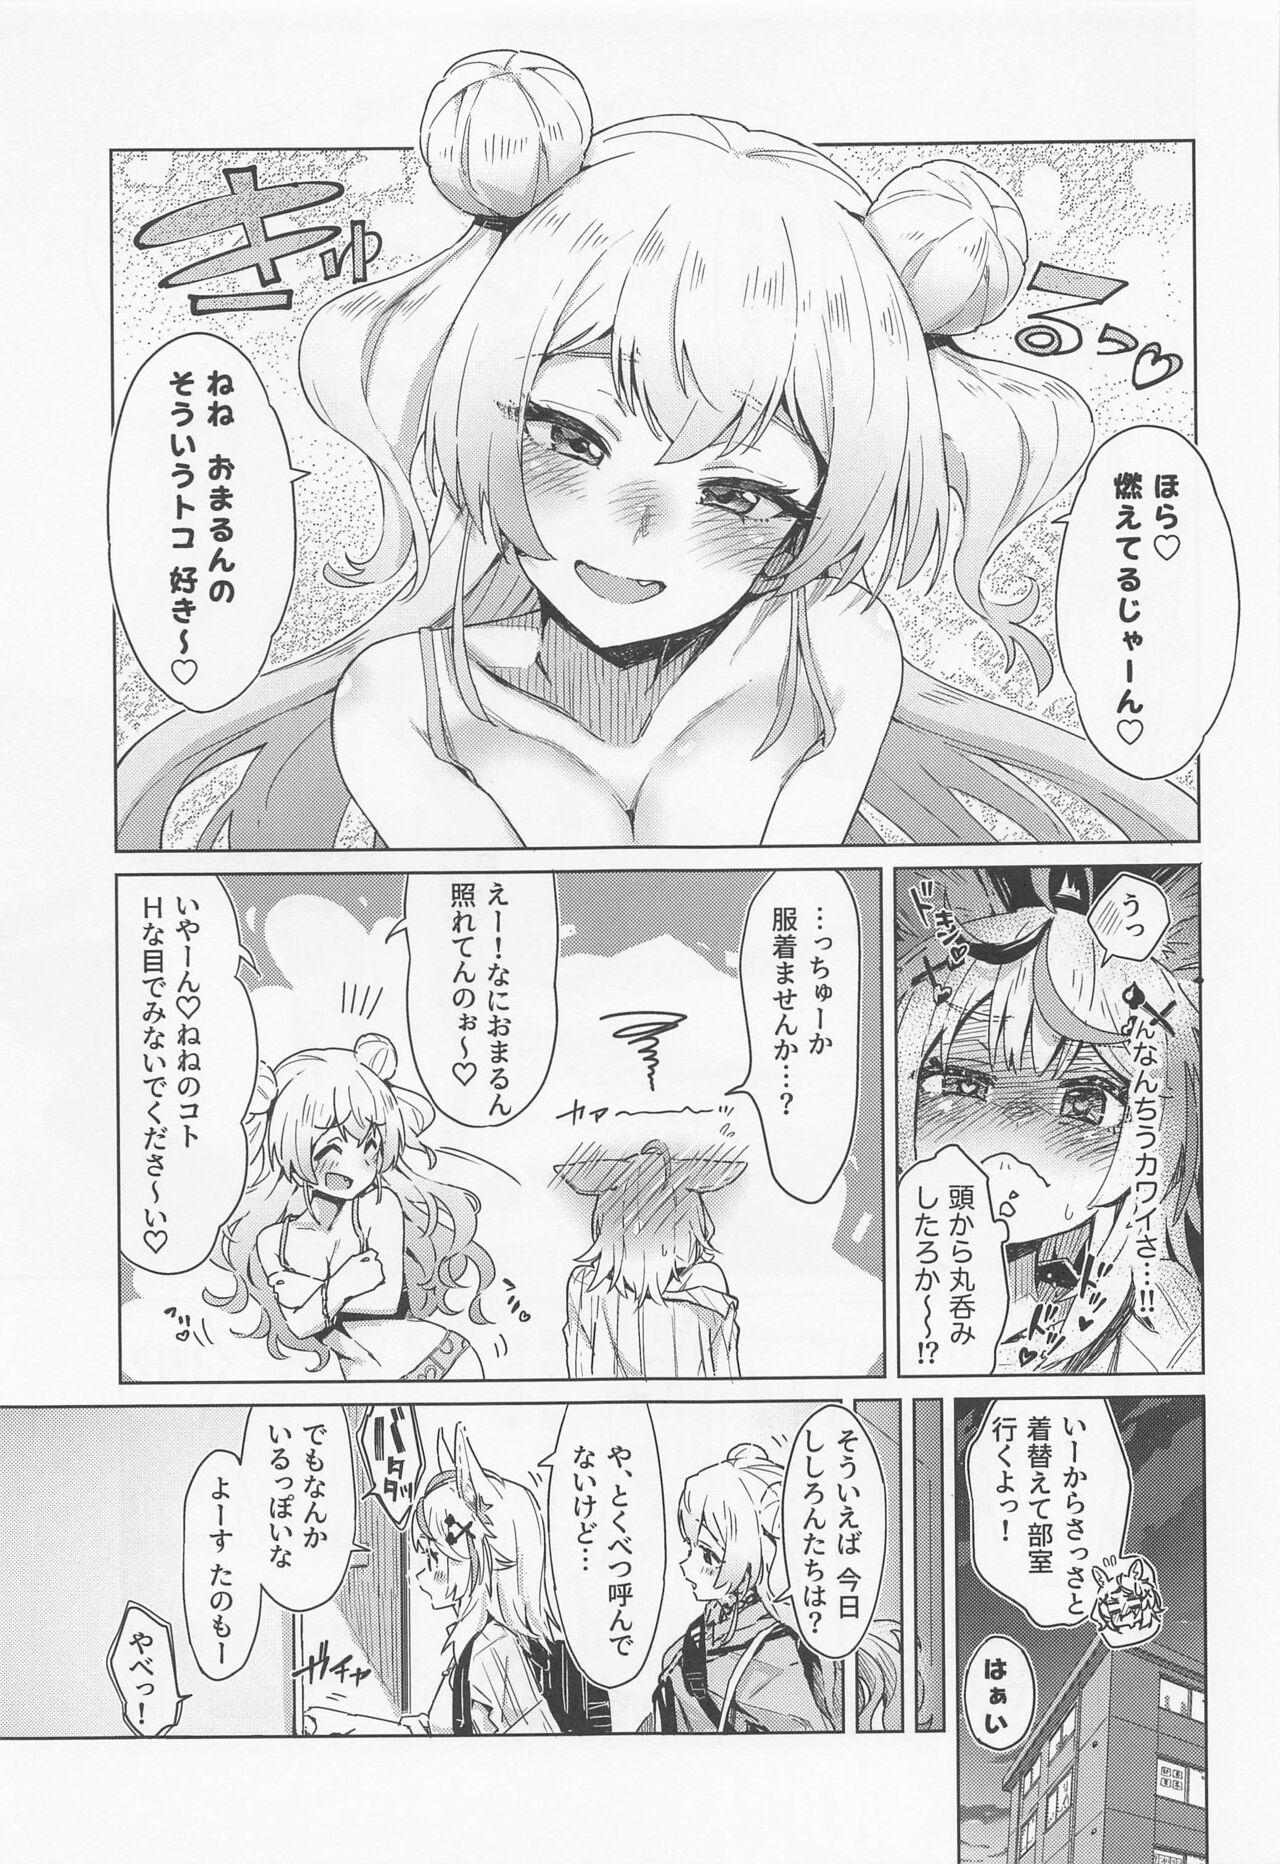 Blond Fennec wa Iseijin no Yume o Miru ka - Does The Fennec Dream of The Lovely Visitor? - Hololive Mamando - Page 8